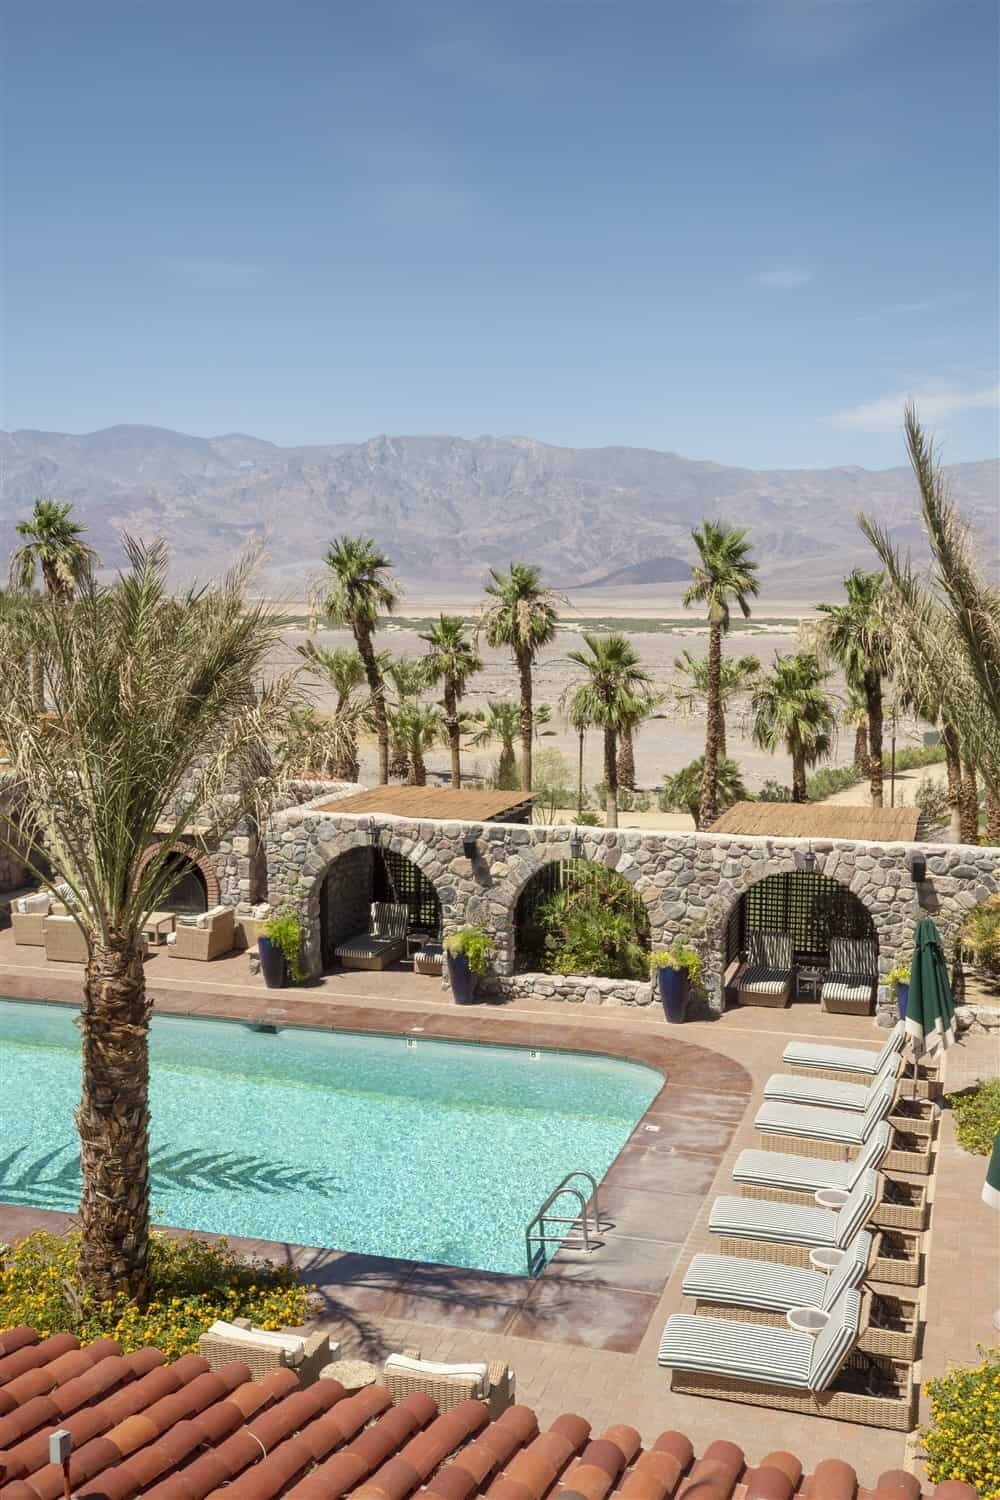 The Oasis at Death Valley - The Inn